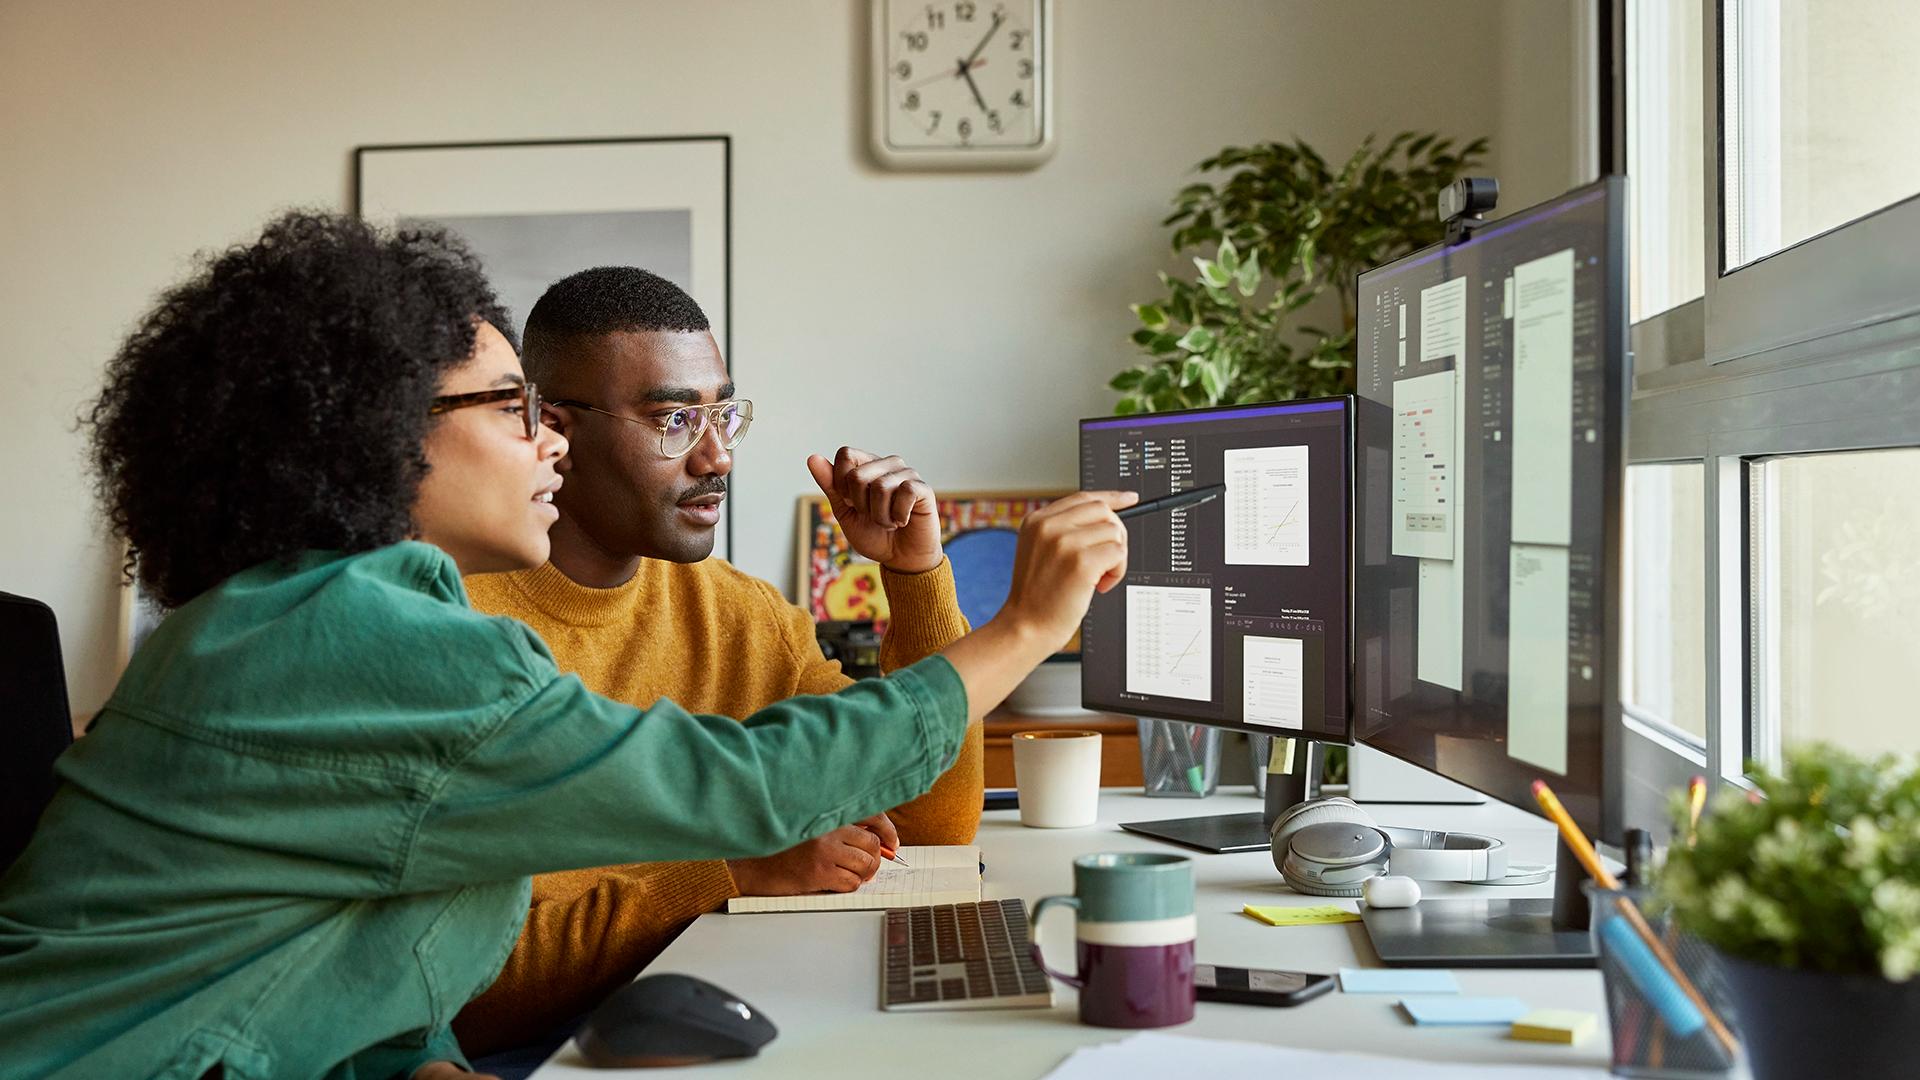 Multiracial colleagues discussing over computer - stock photo